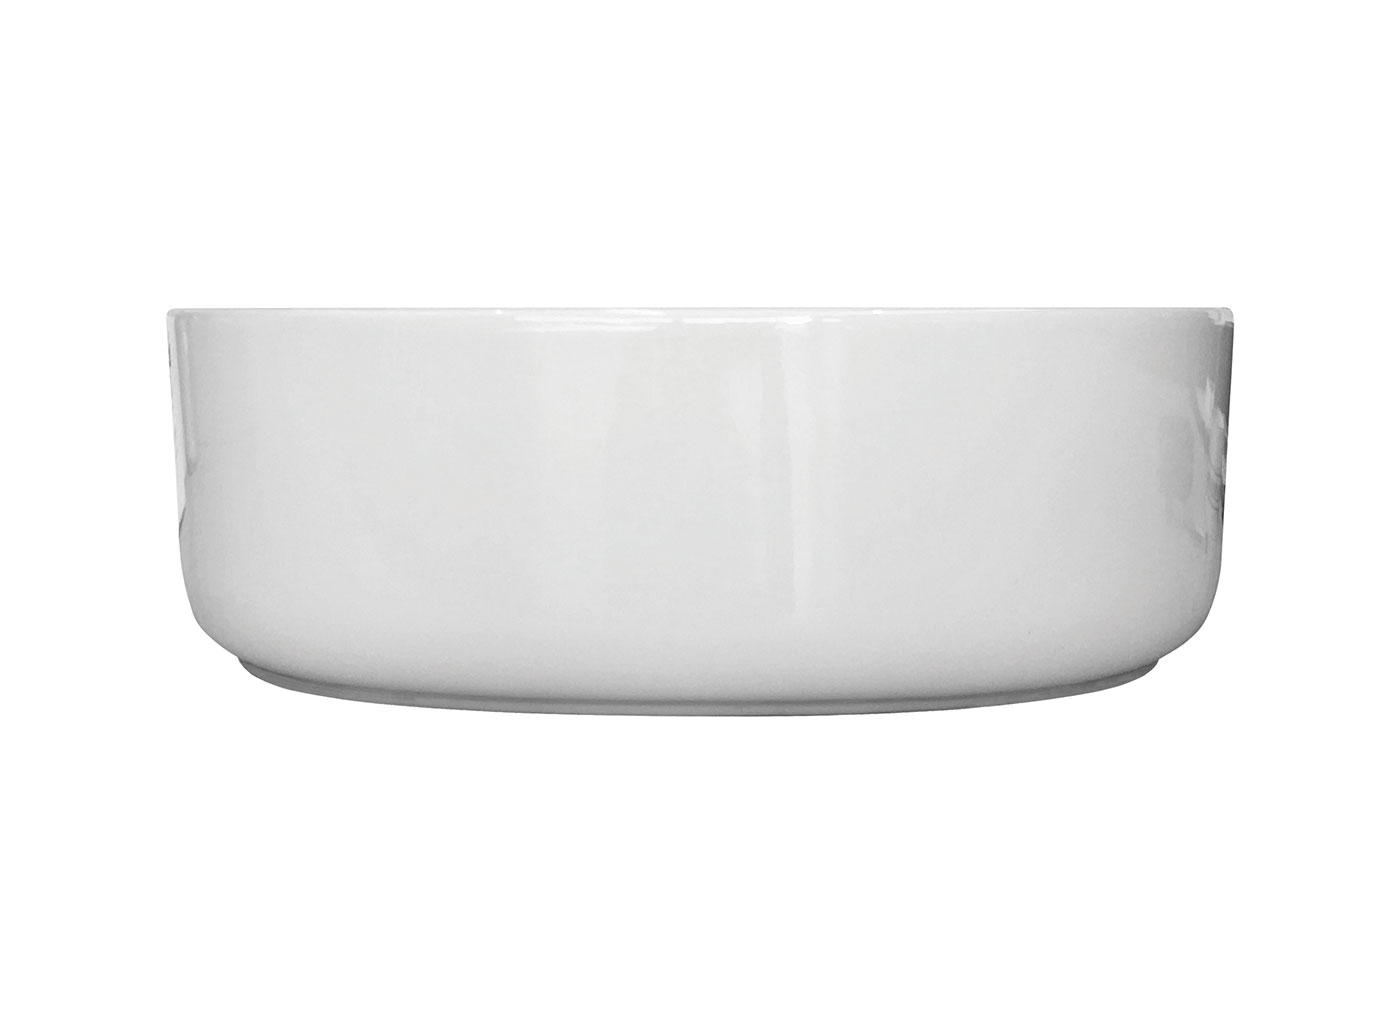 and fresh. They are the perfect basin to bring a modern vintage look to your bathroom.